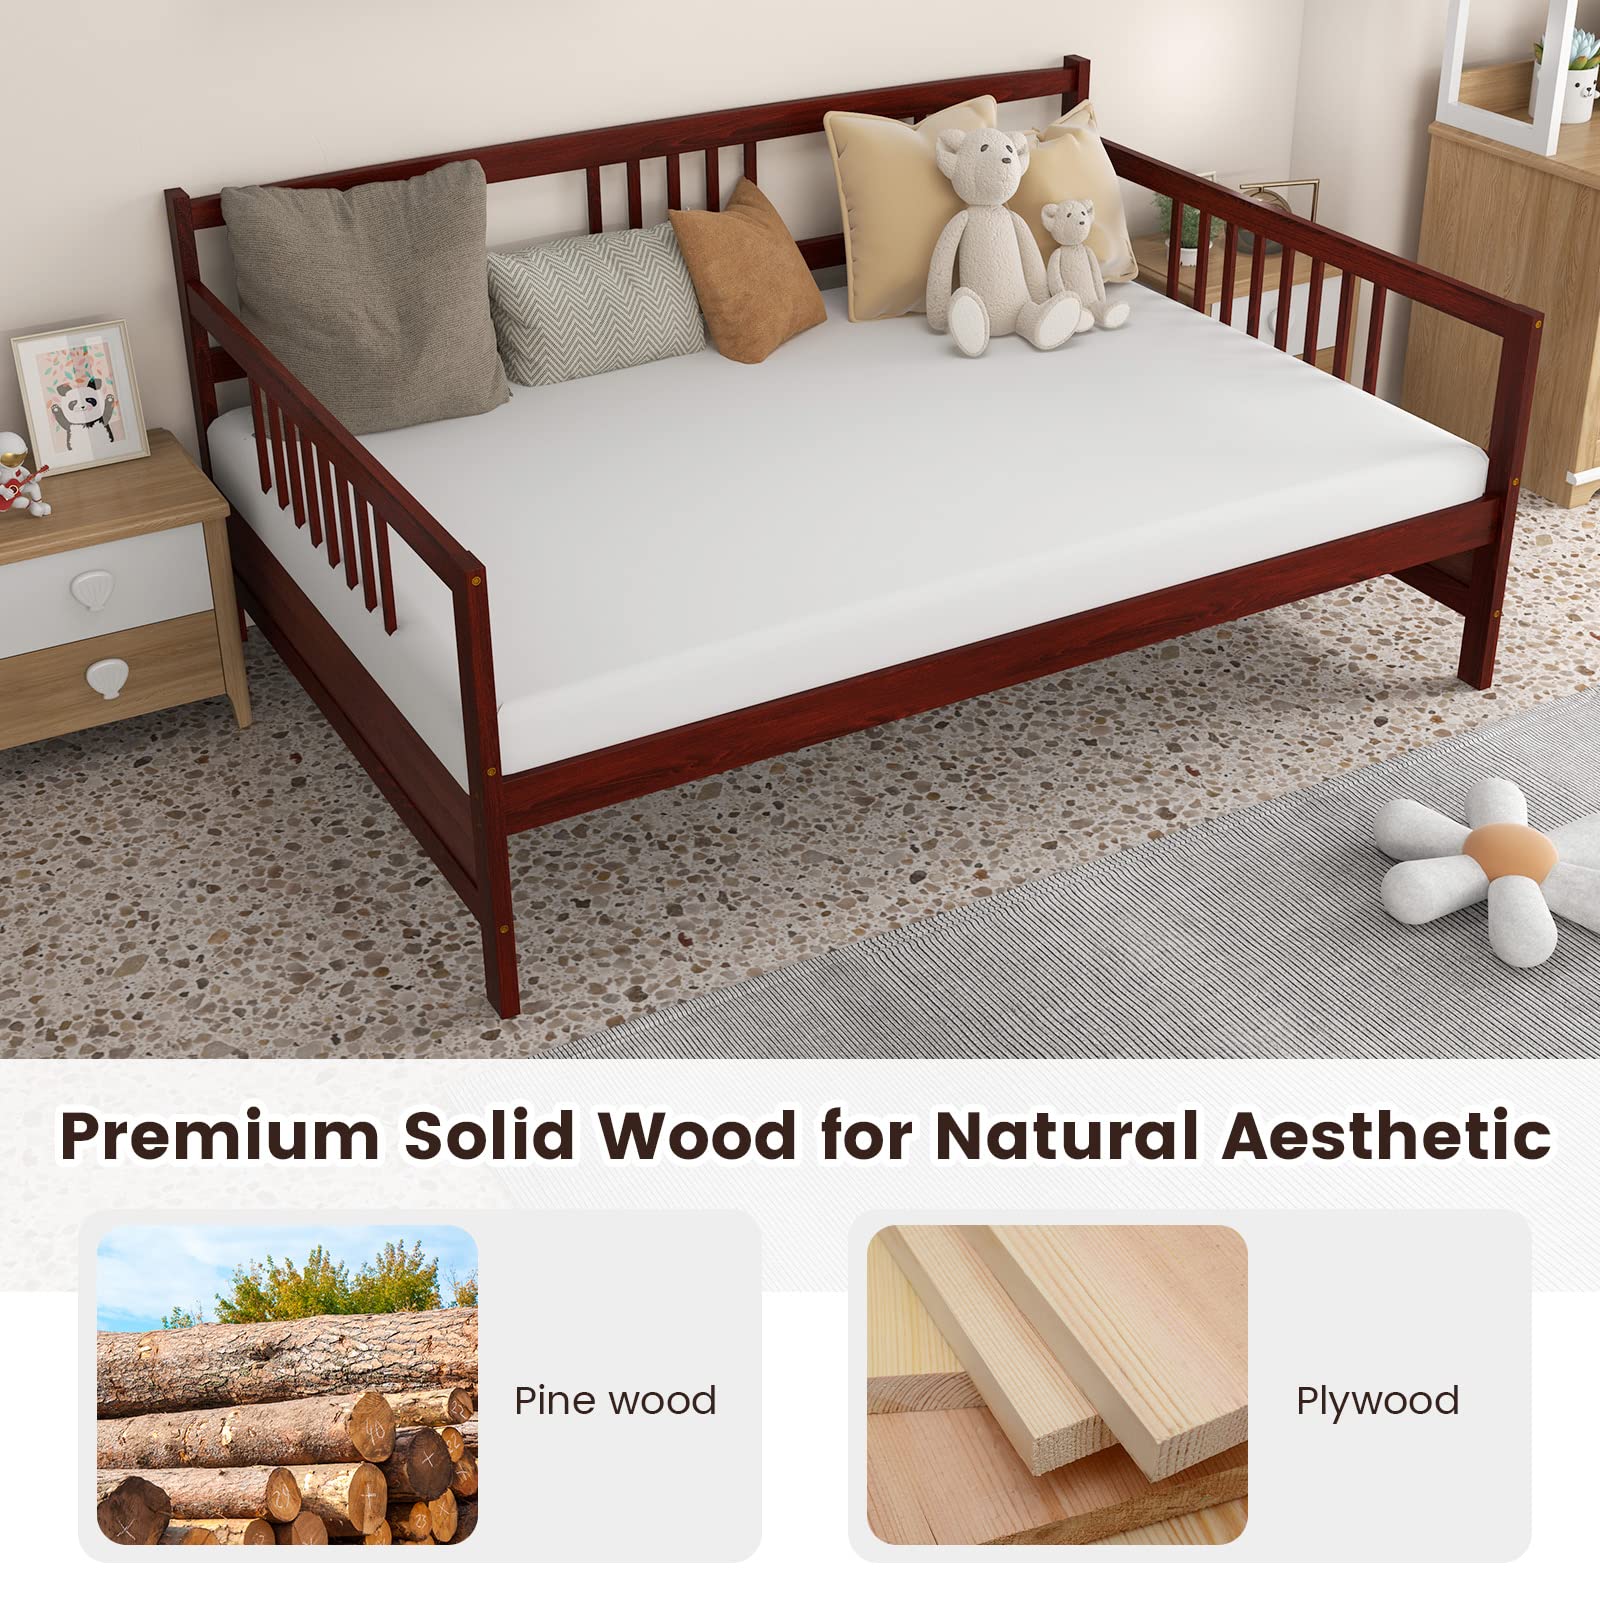 Giantex Full Size Daybed, Wooden Daybed Sofa Bed Frame with Wood Slat Support for Kids Teens (Full)